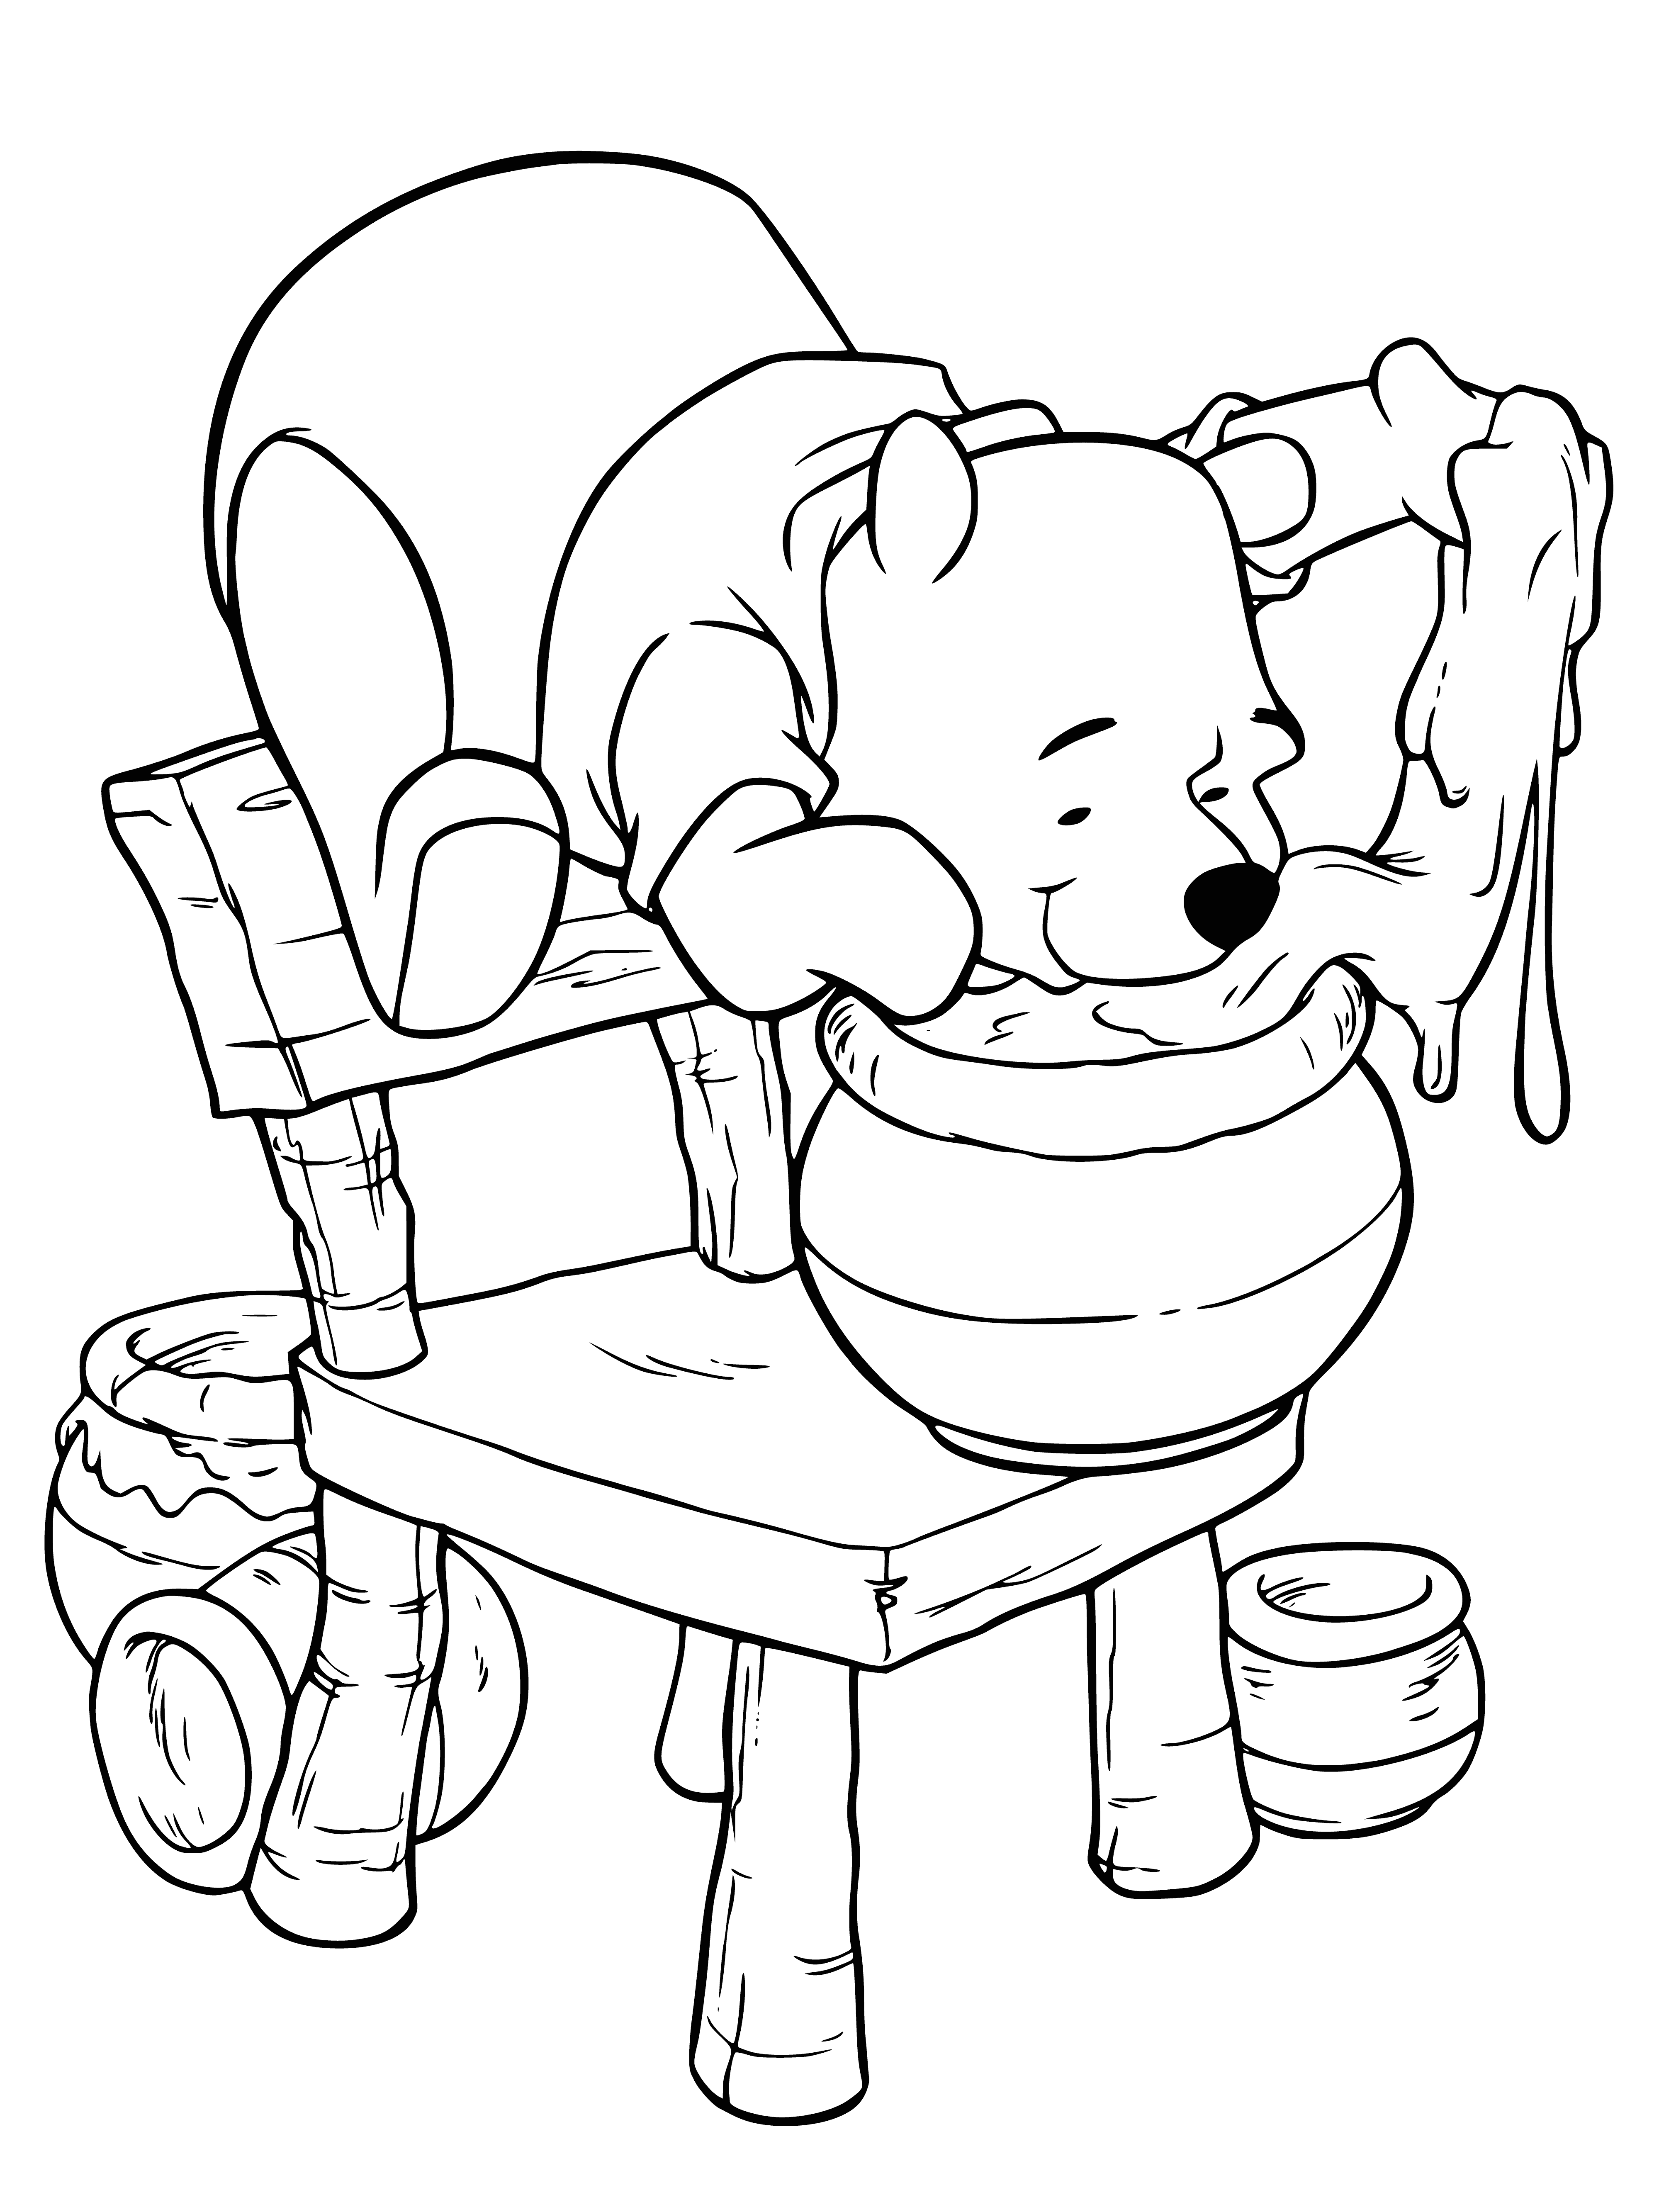 Winnie and honey coloring page